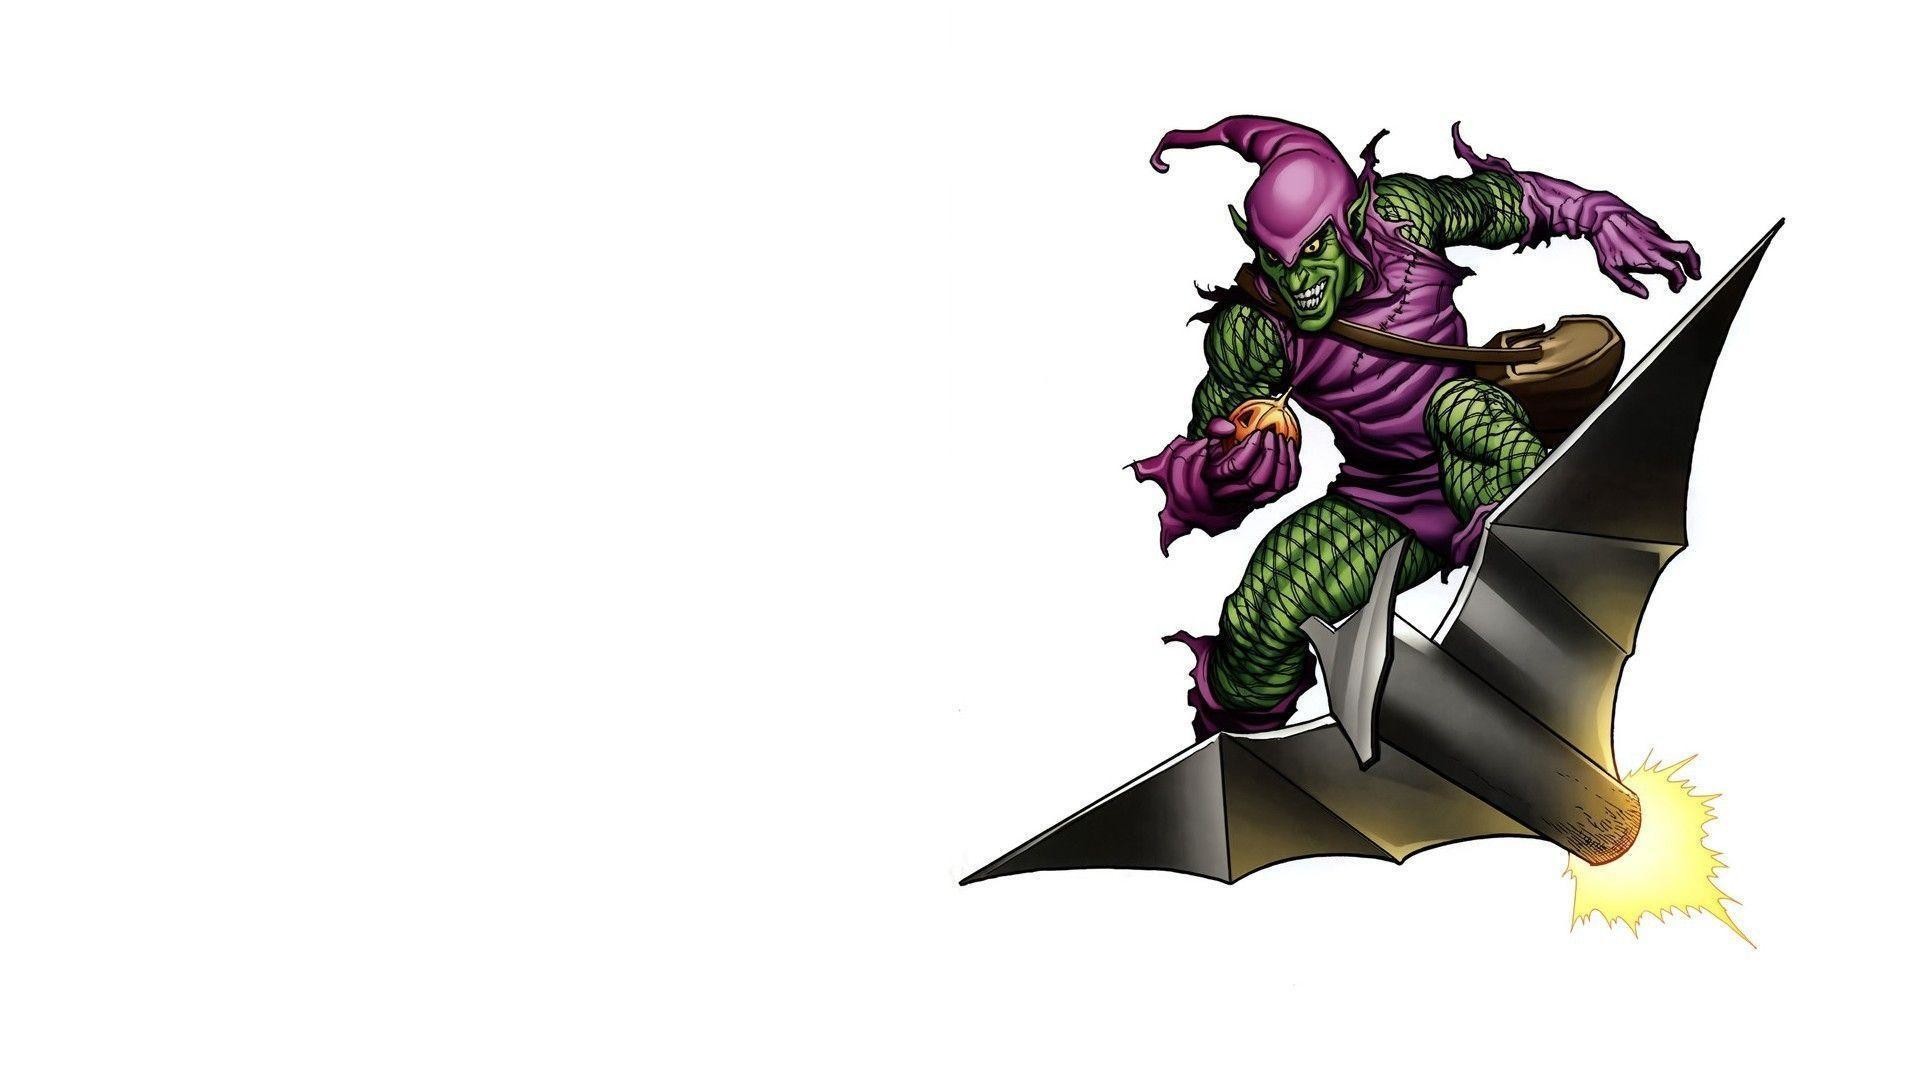 1920x1080 The Green Goblin Is Defeated